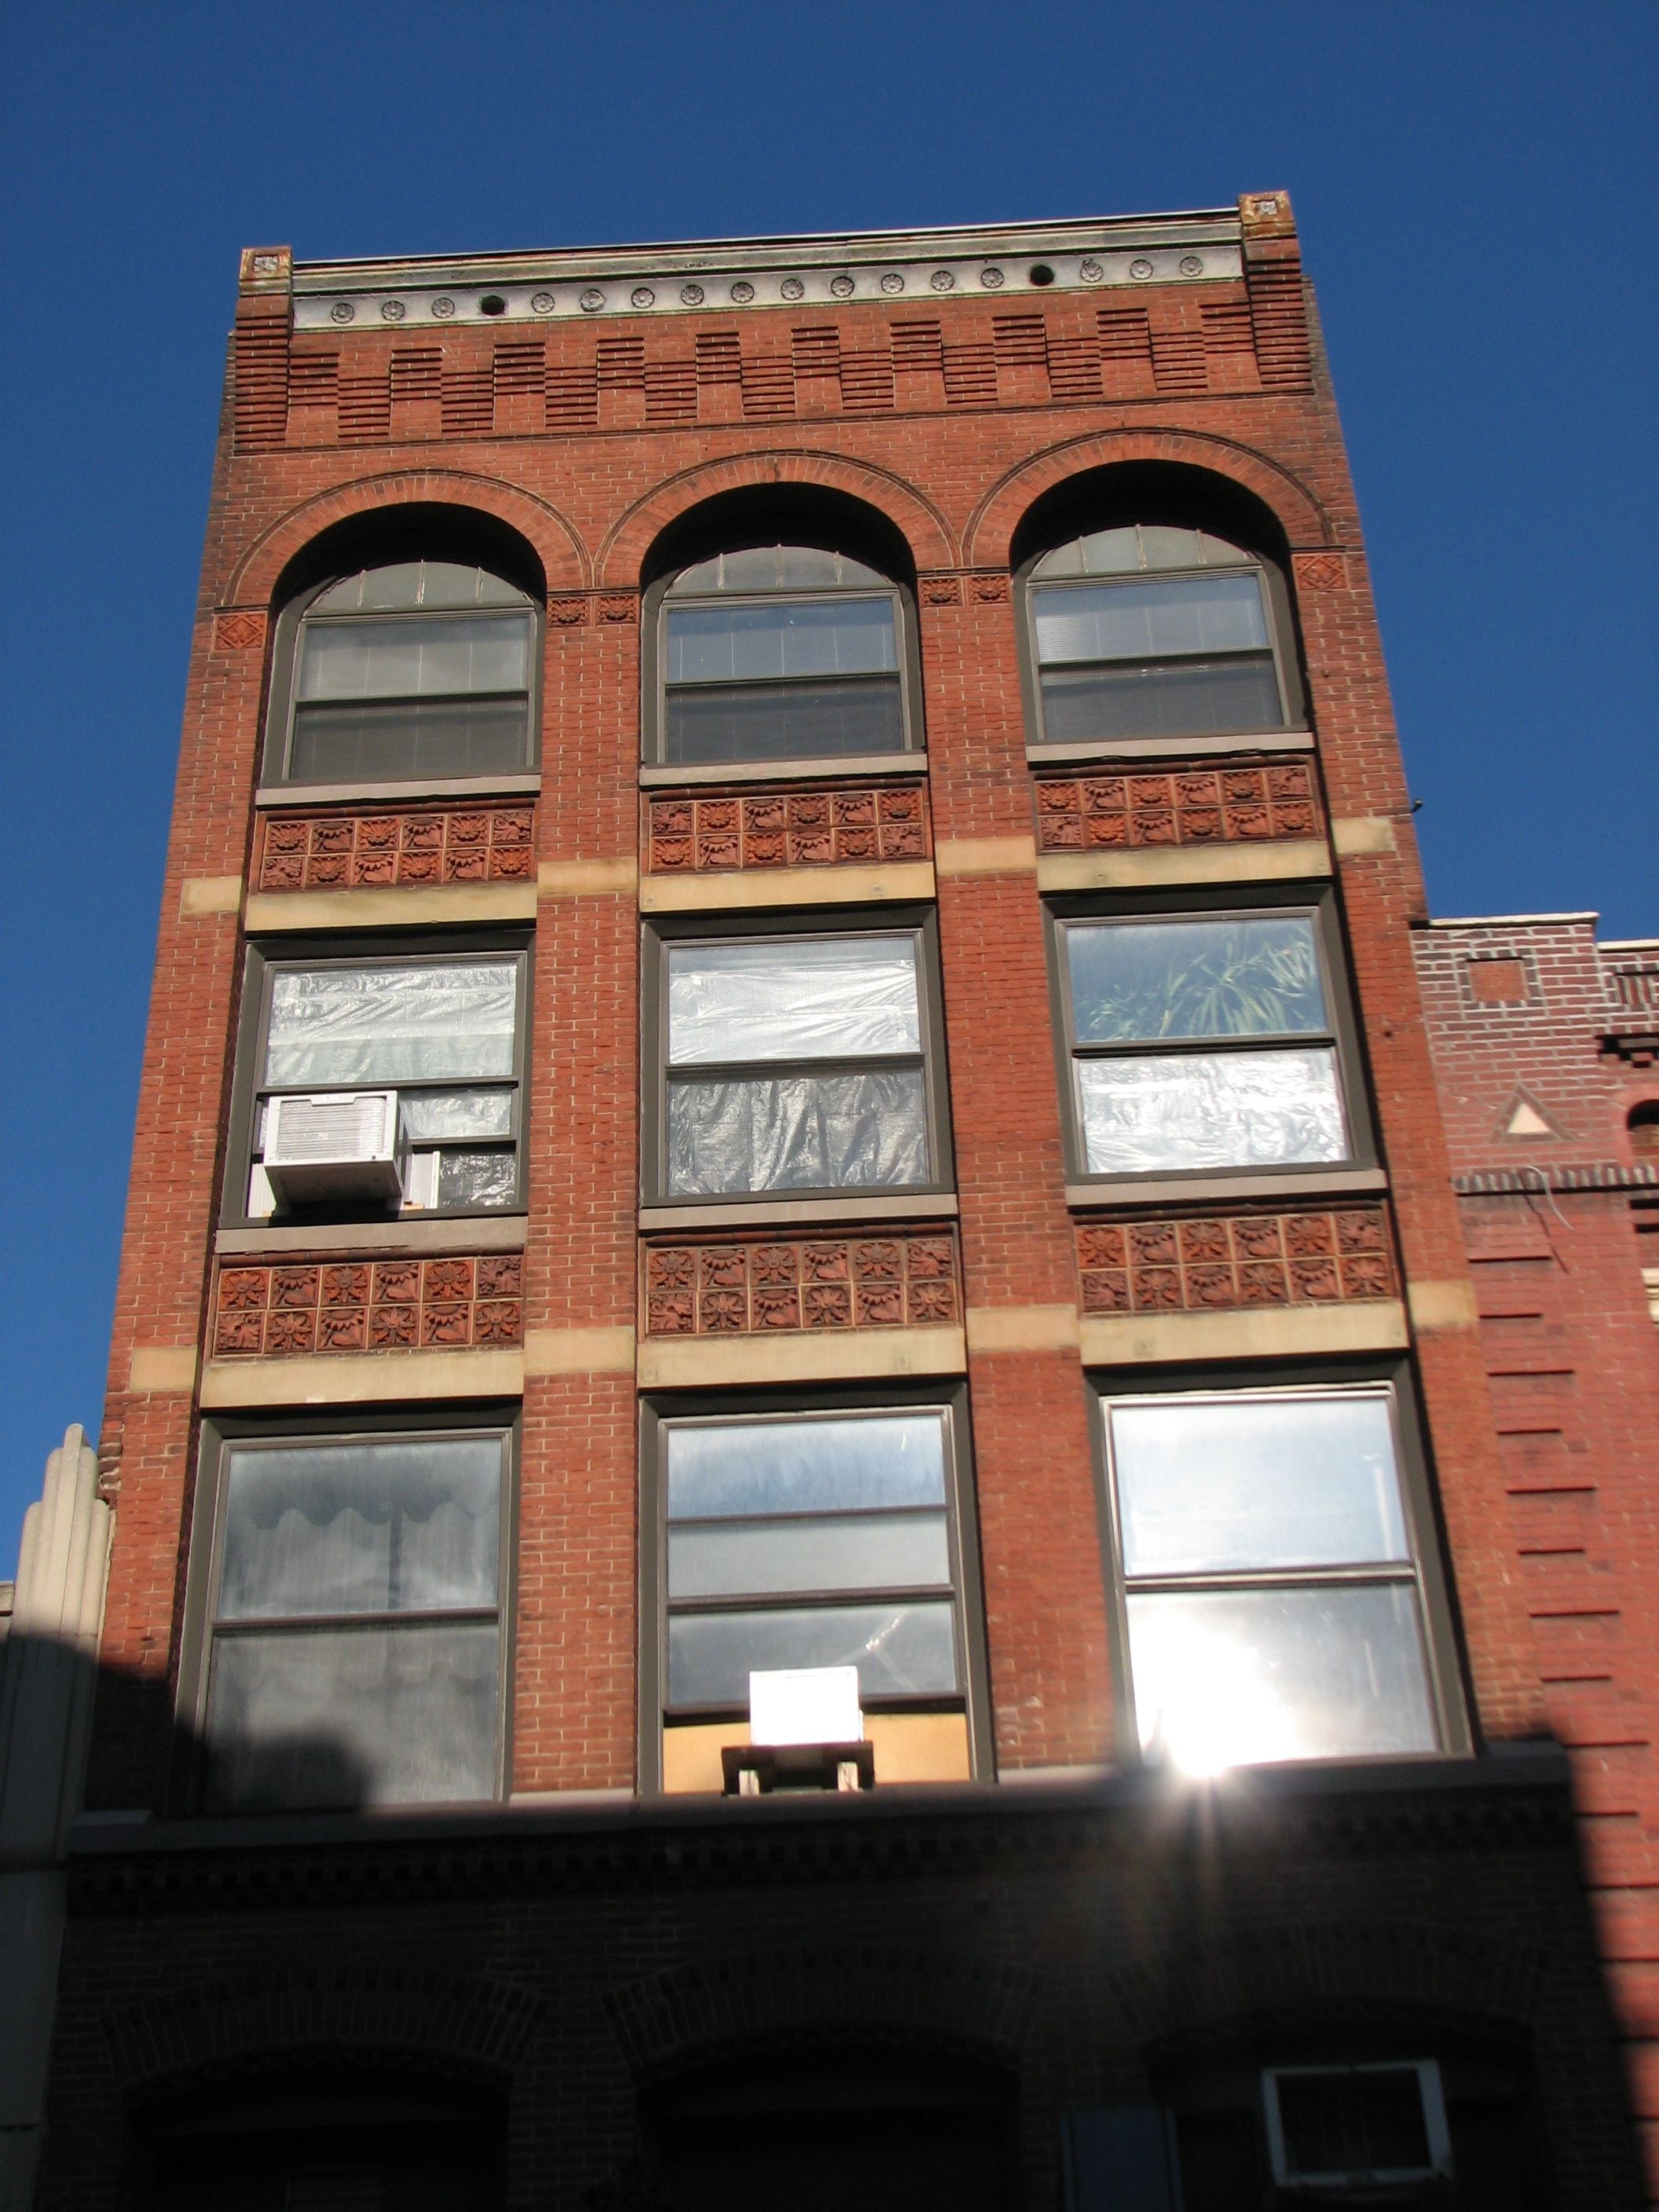 A commercial building on Sansom's north side features terra cotta tiles and corbelled brick.